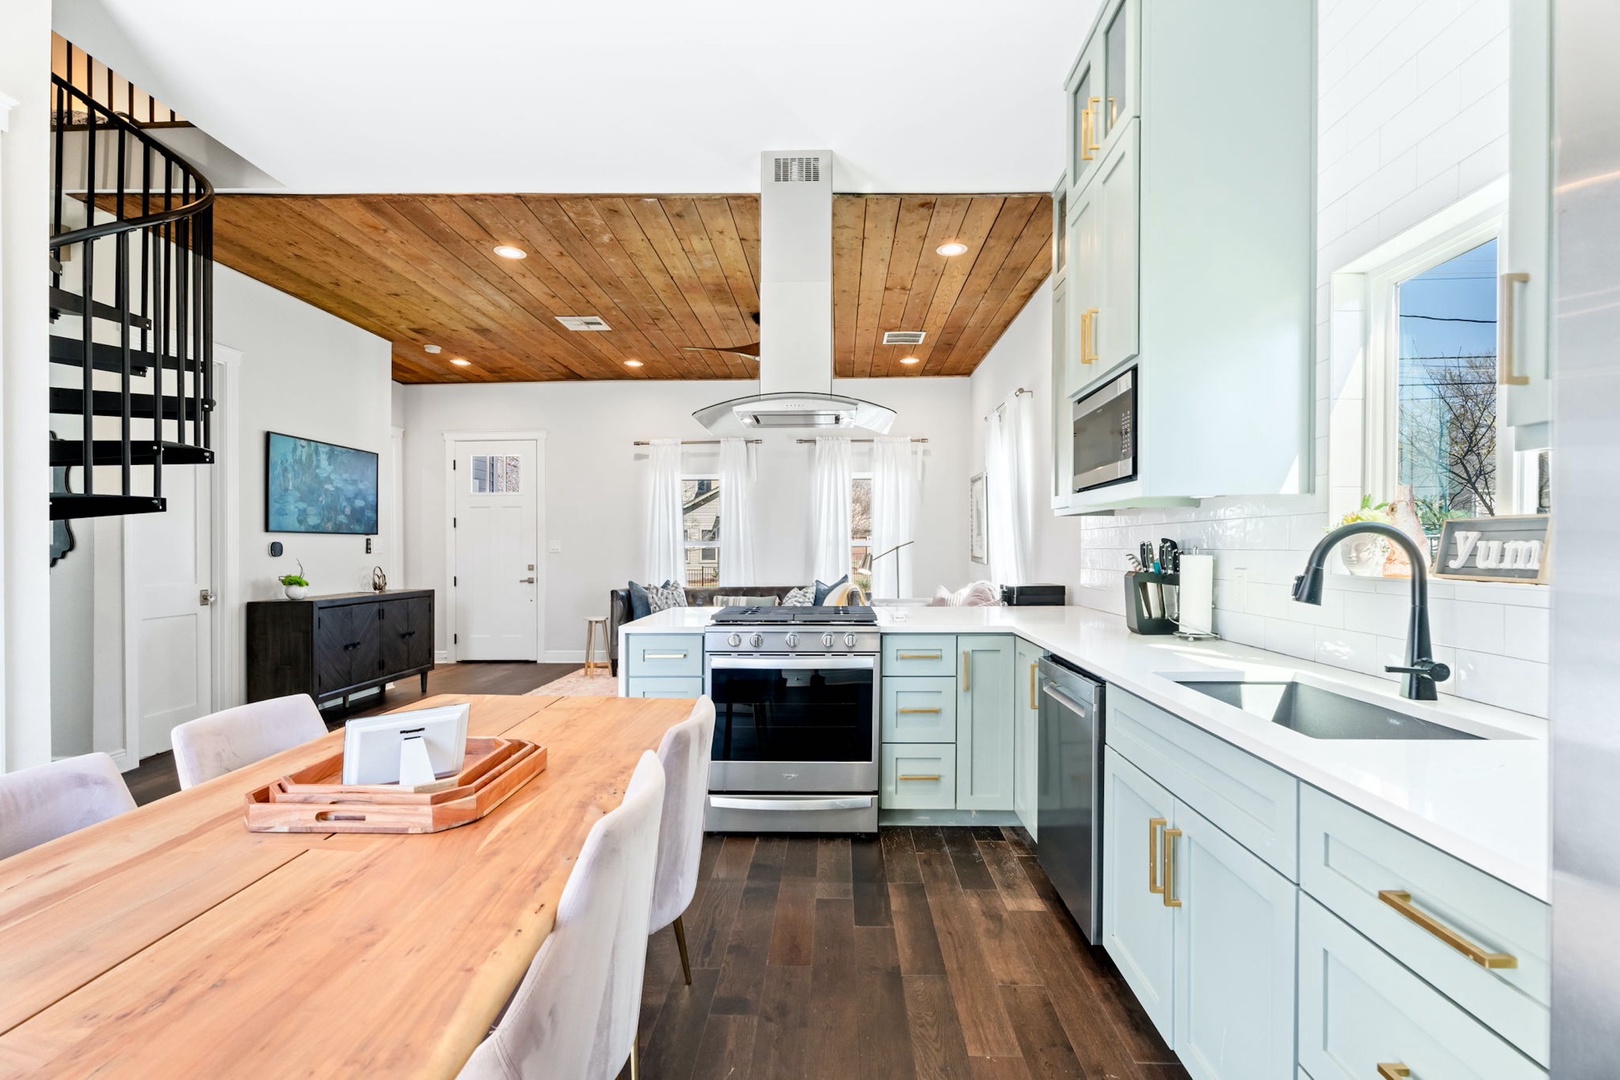 Whip up culinary delights in the spacious & modern kitchen